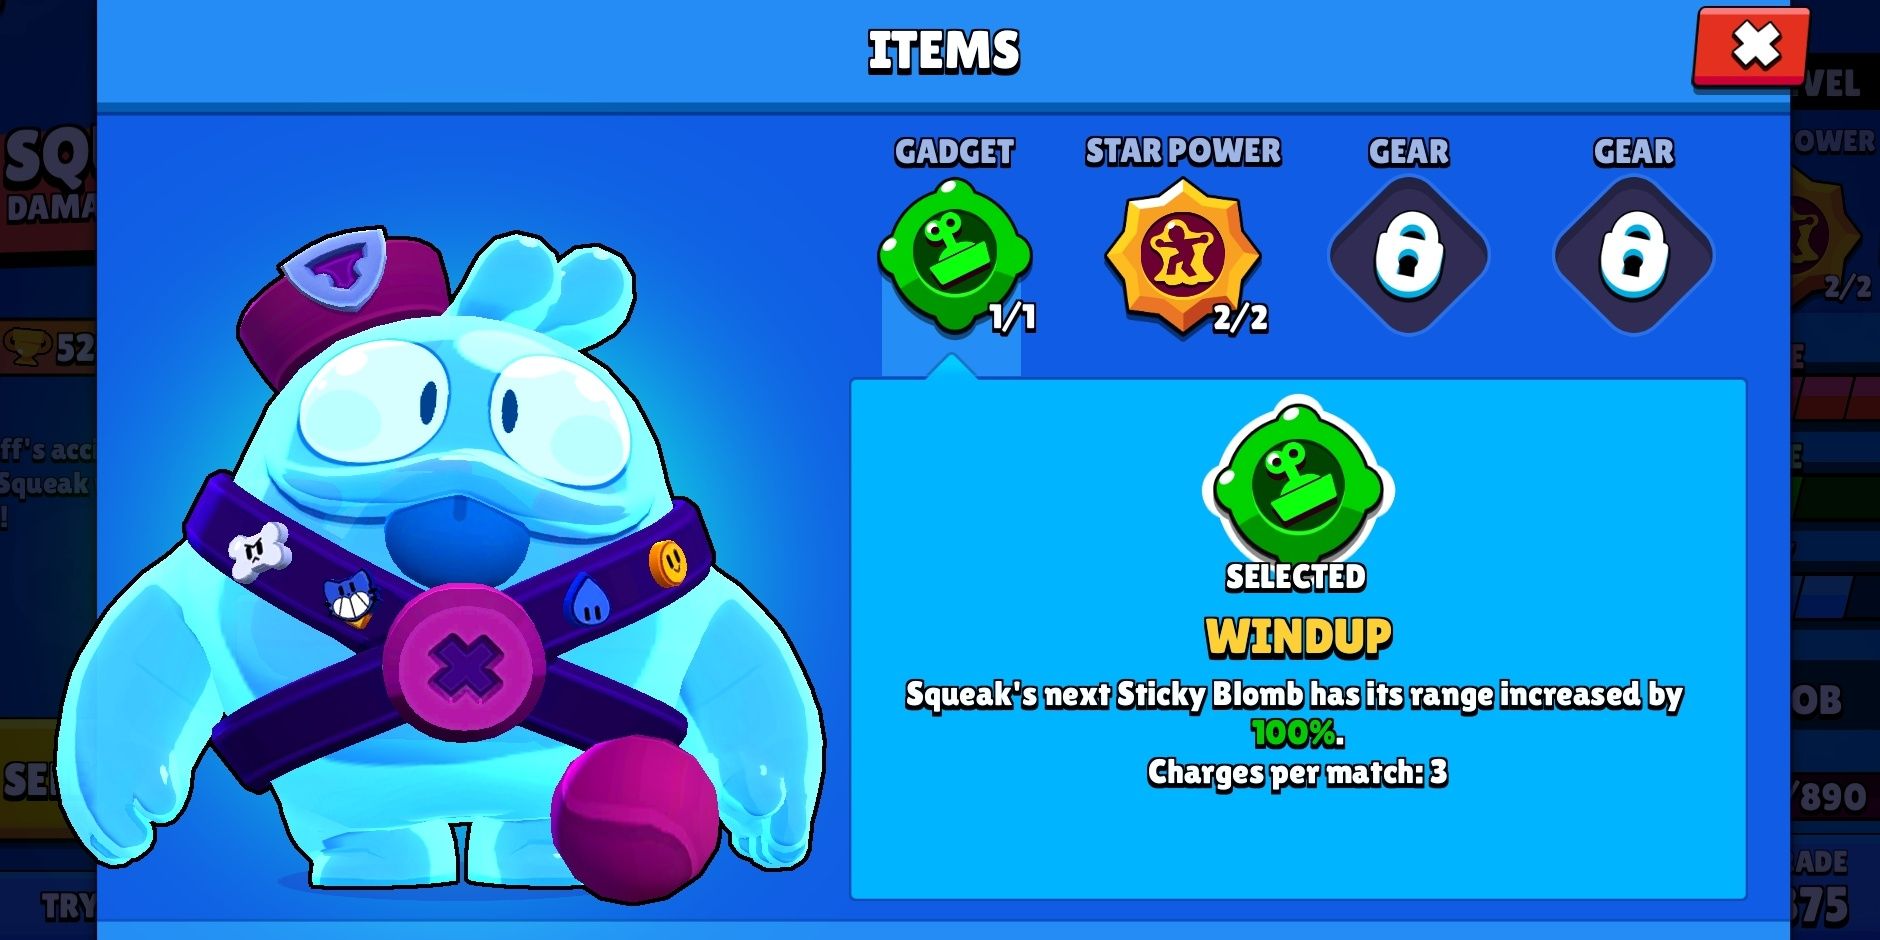 THE WORST GADGETS AND STAR POWERS IN BRAWL STARS 